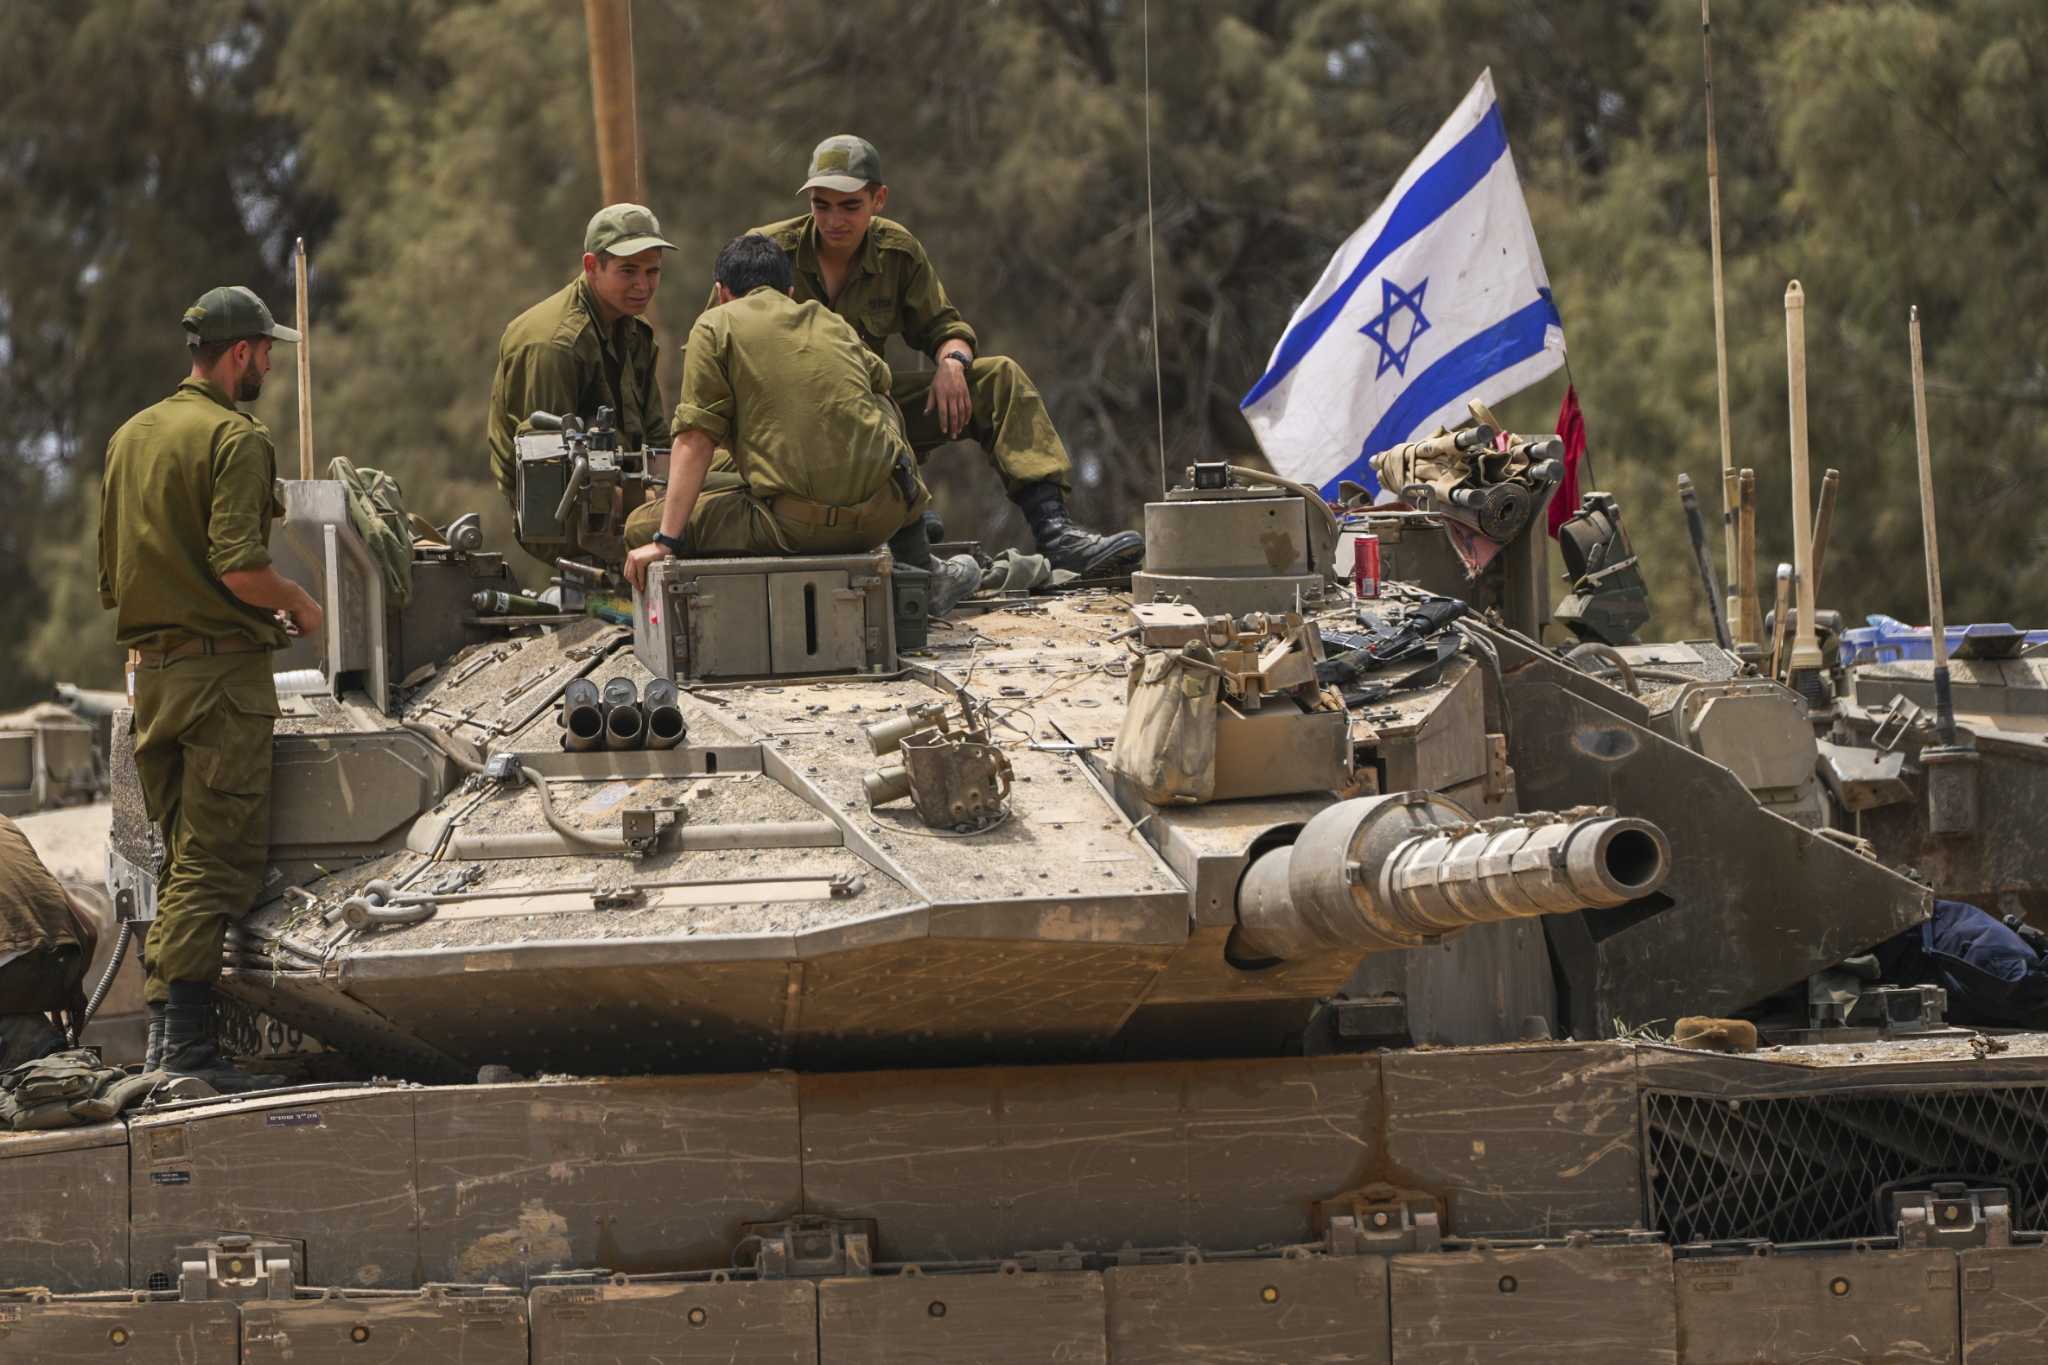 The Latest | Israel says it controls Gaza's entire border with Egypt, as Rafah assault expands